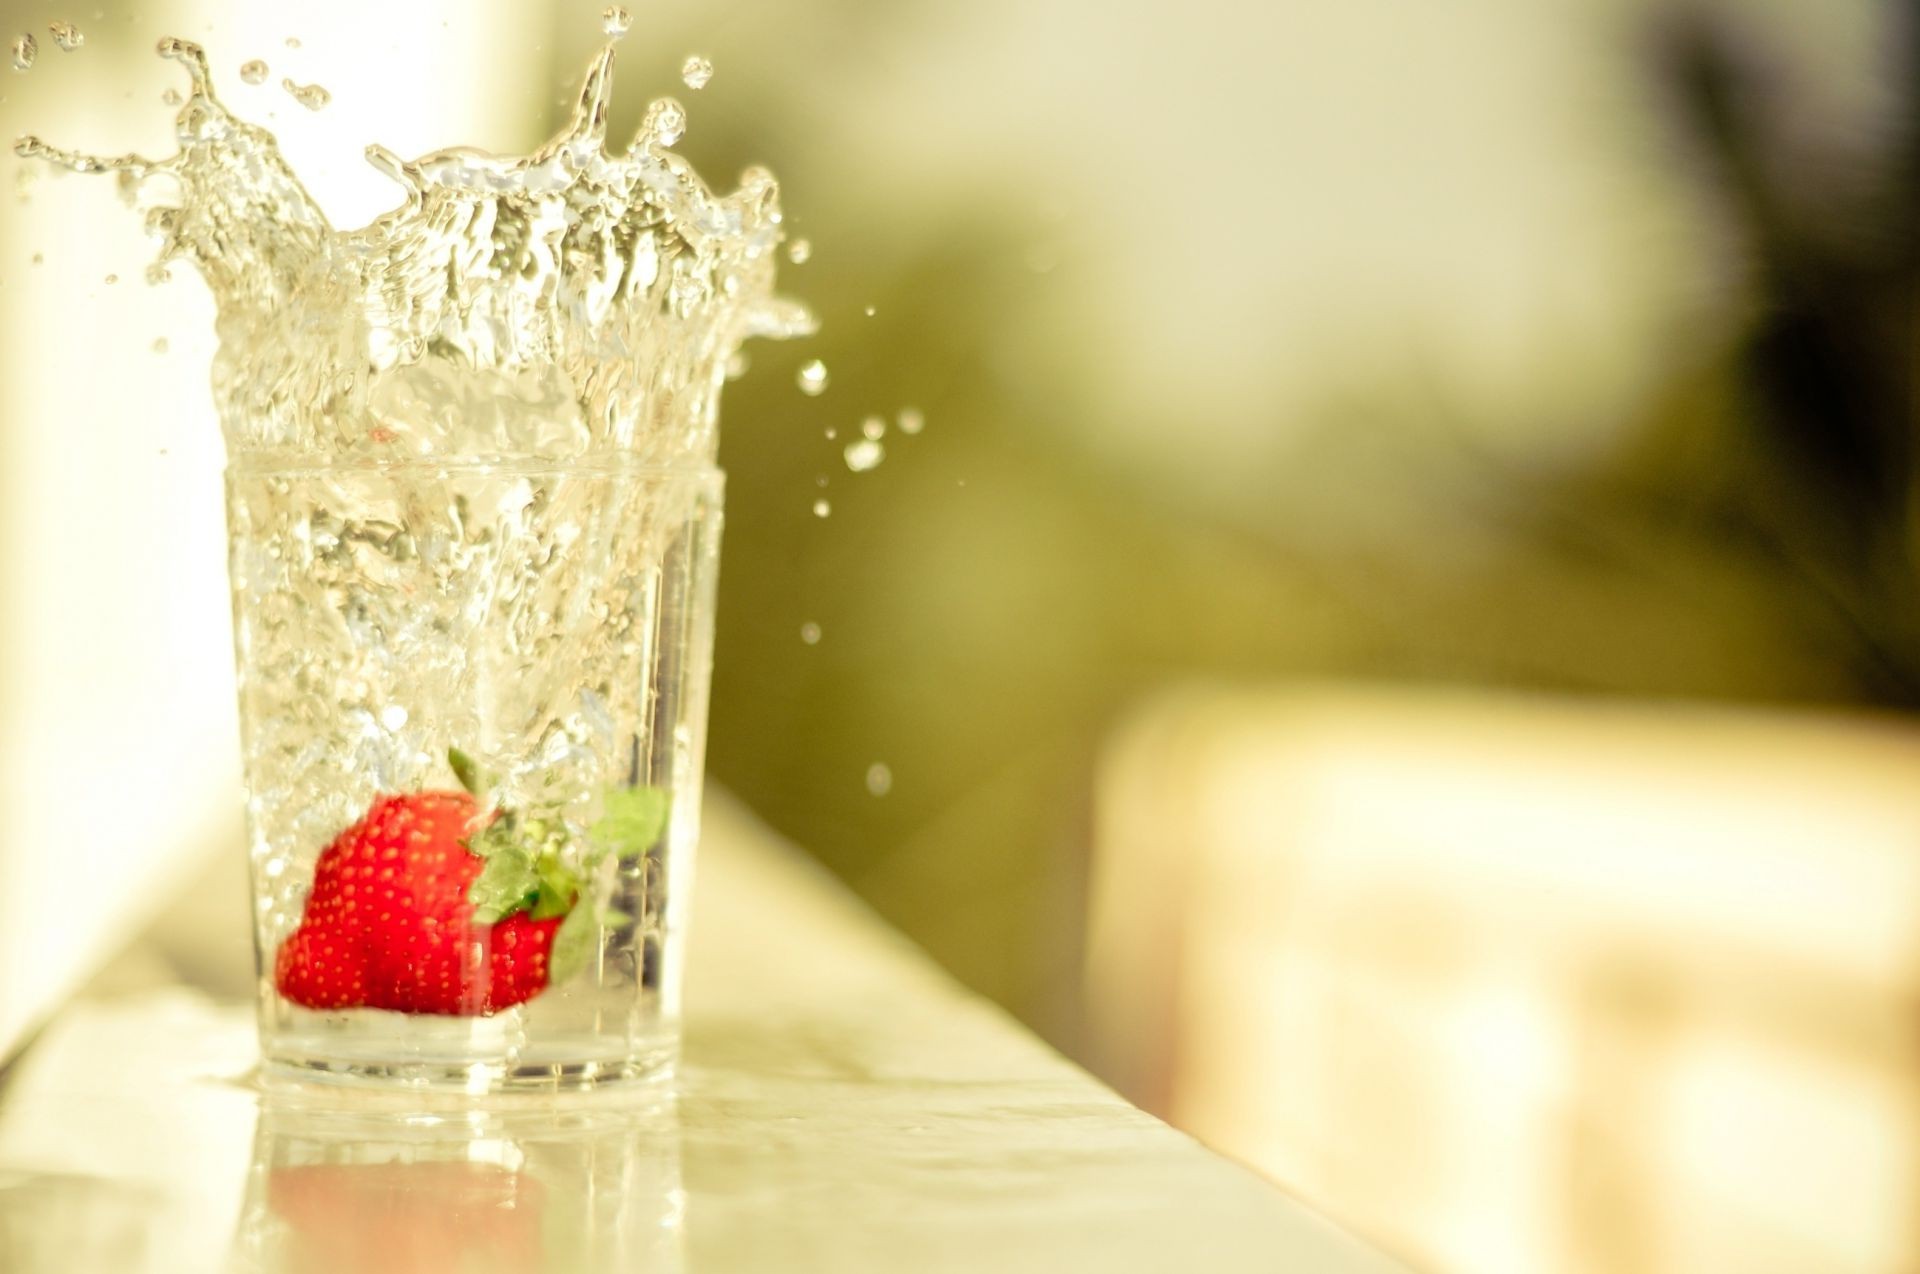 food & drink glass ice fruit food drink cold water blur refreshment sweet strawberry wet